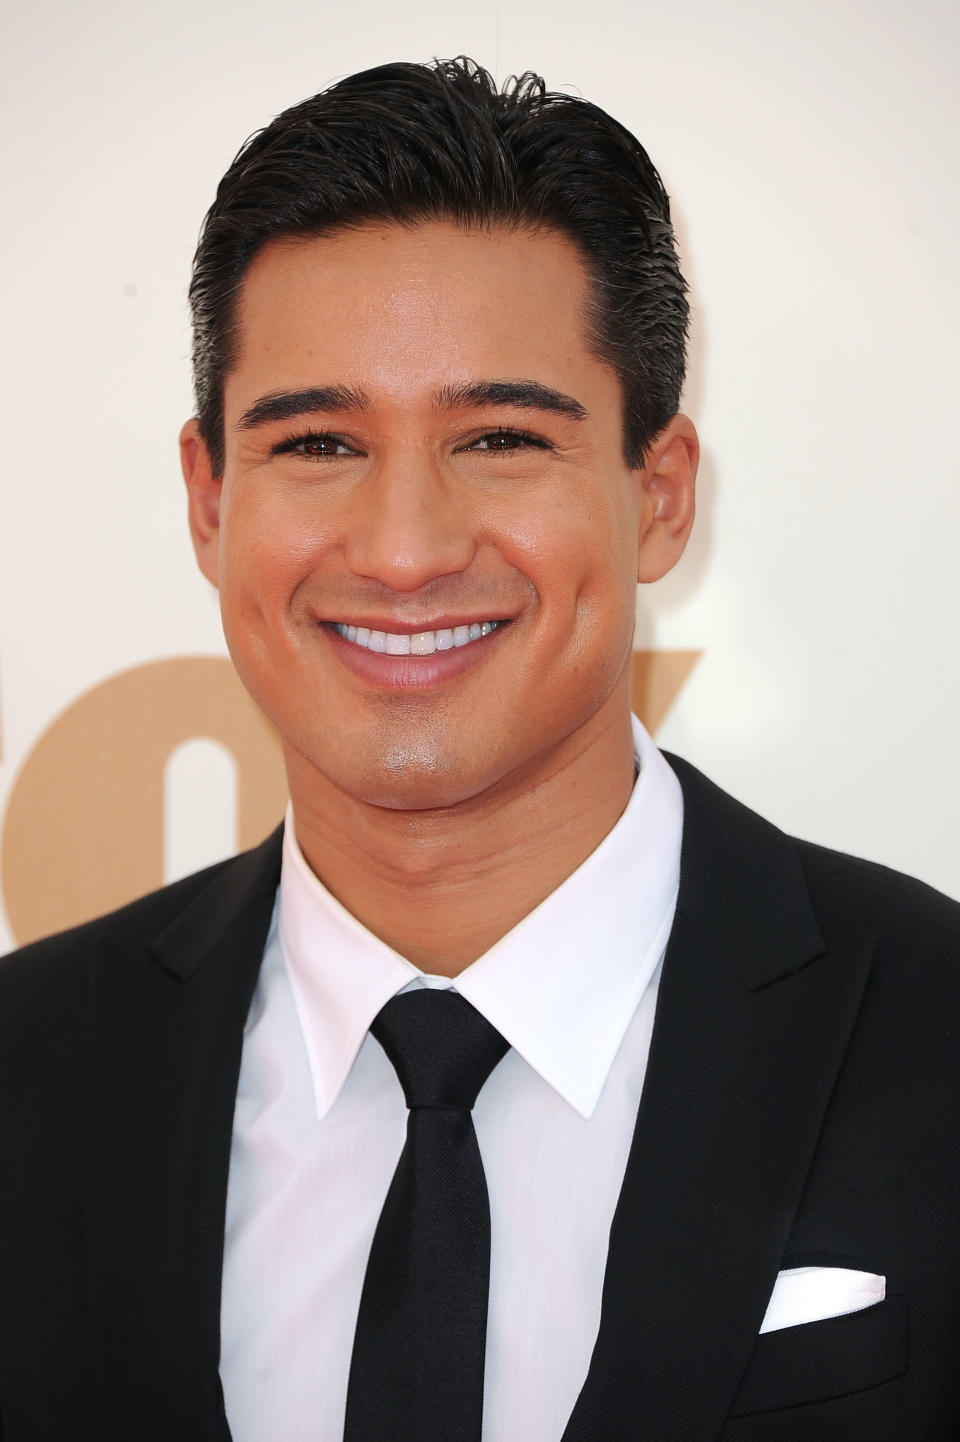 MARIO LOPEZ. Dimples can make a face look younger. Who would have thought actor and TV host Mario Lopez in his late 30s? His bedimpled smile make him look as if he's still the 90s "Saved By The Bell" star fans fell in love with. (Photo by Frazer Harrison/Getty Images)